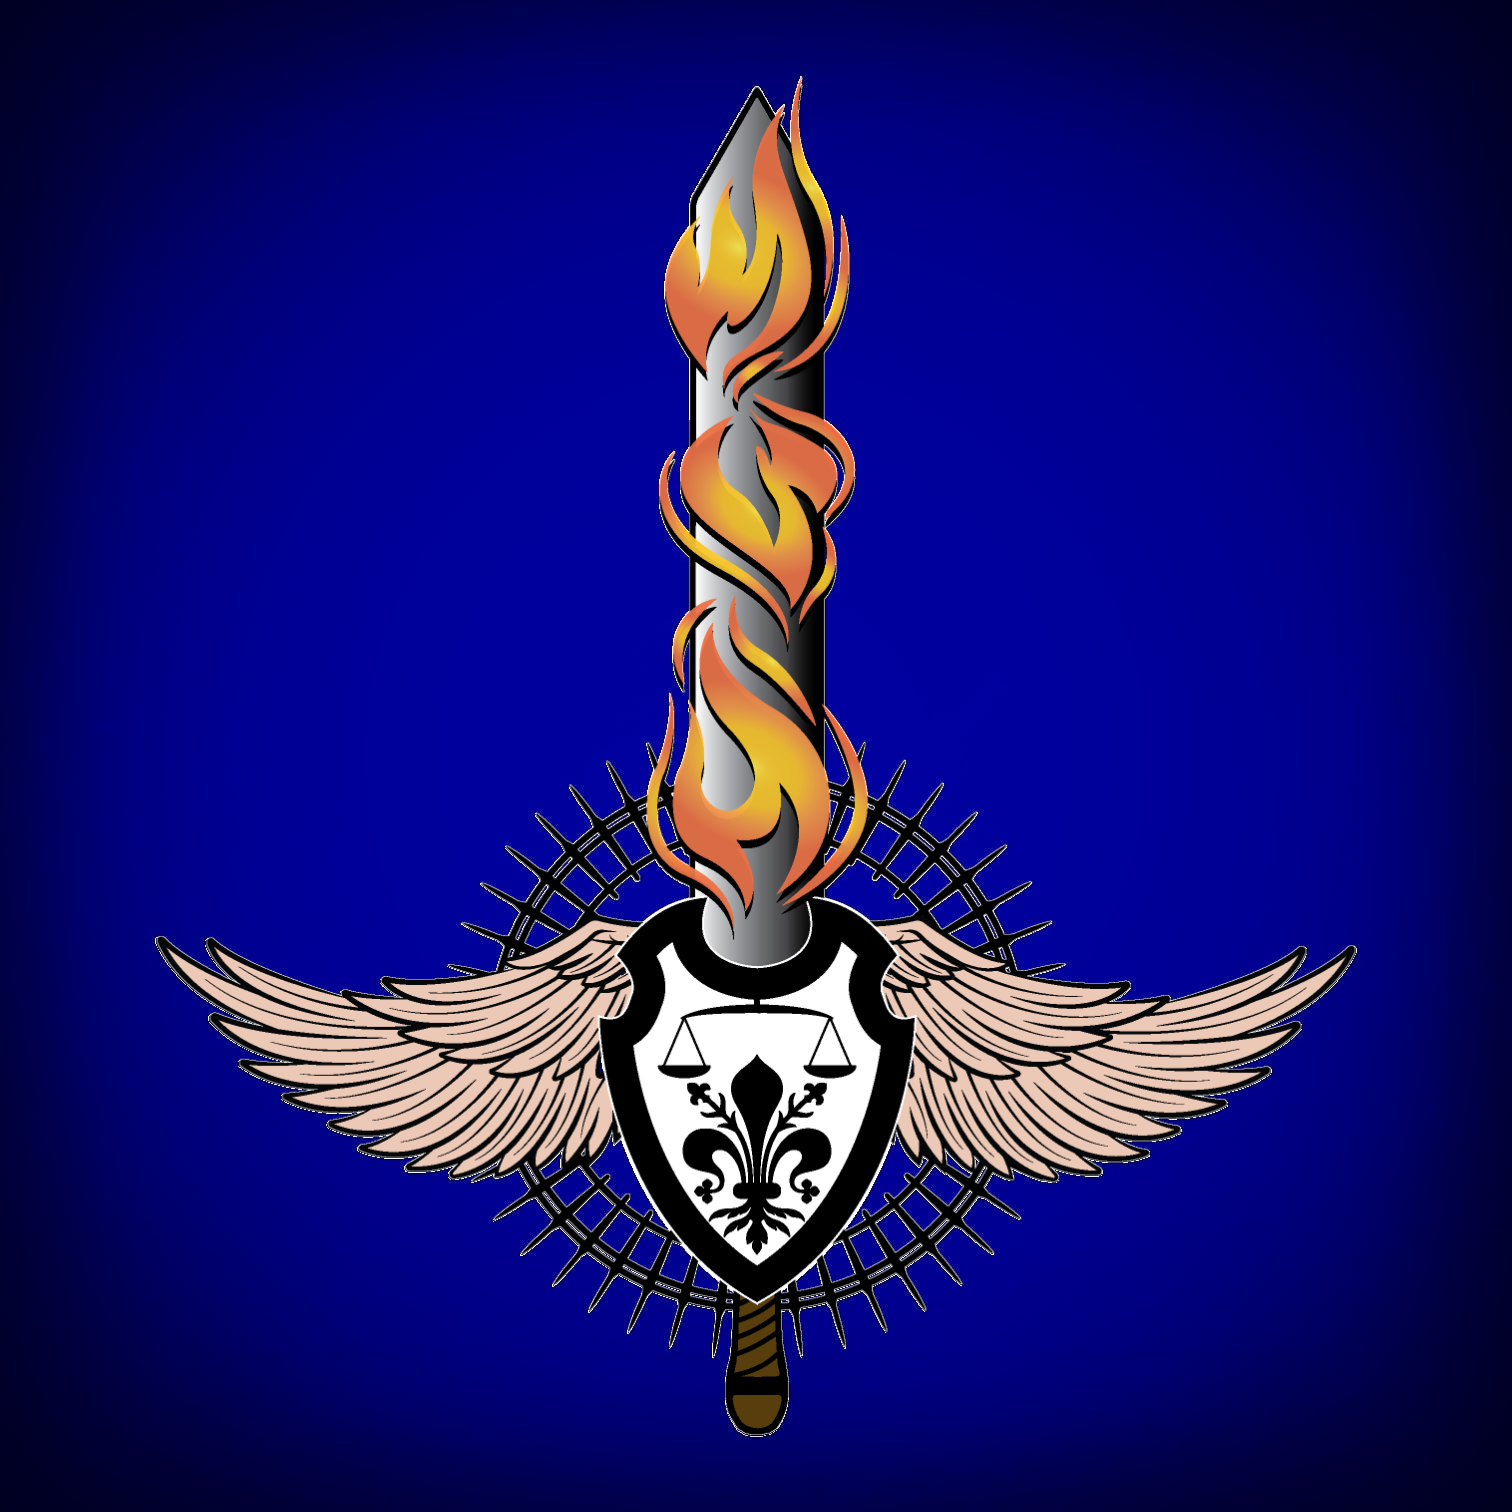 St. Michael's Ministry of Gnosis logo